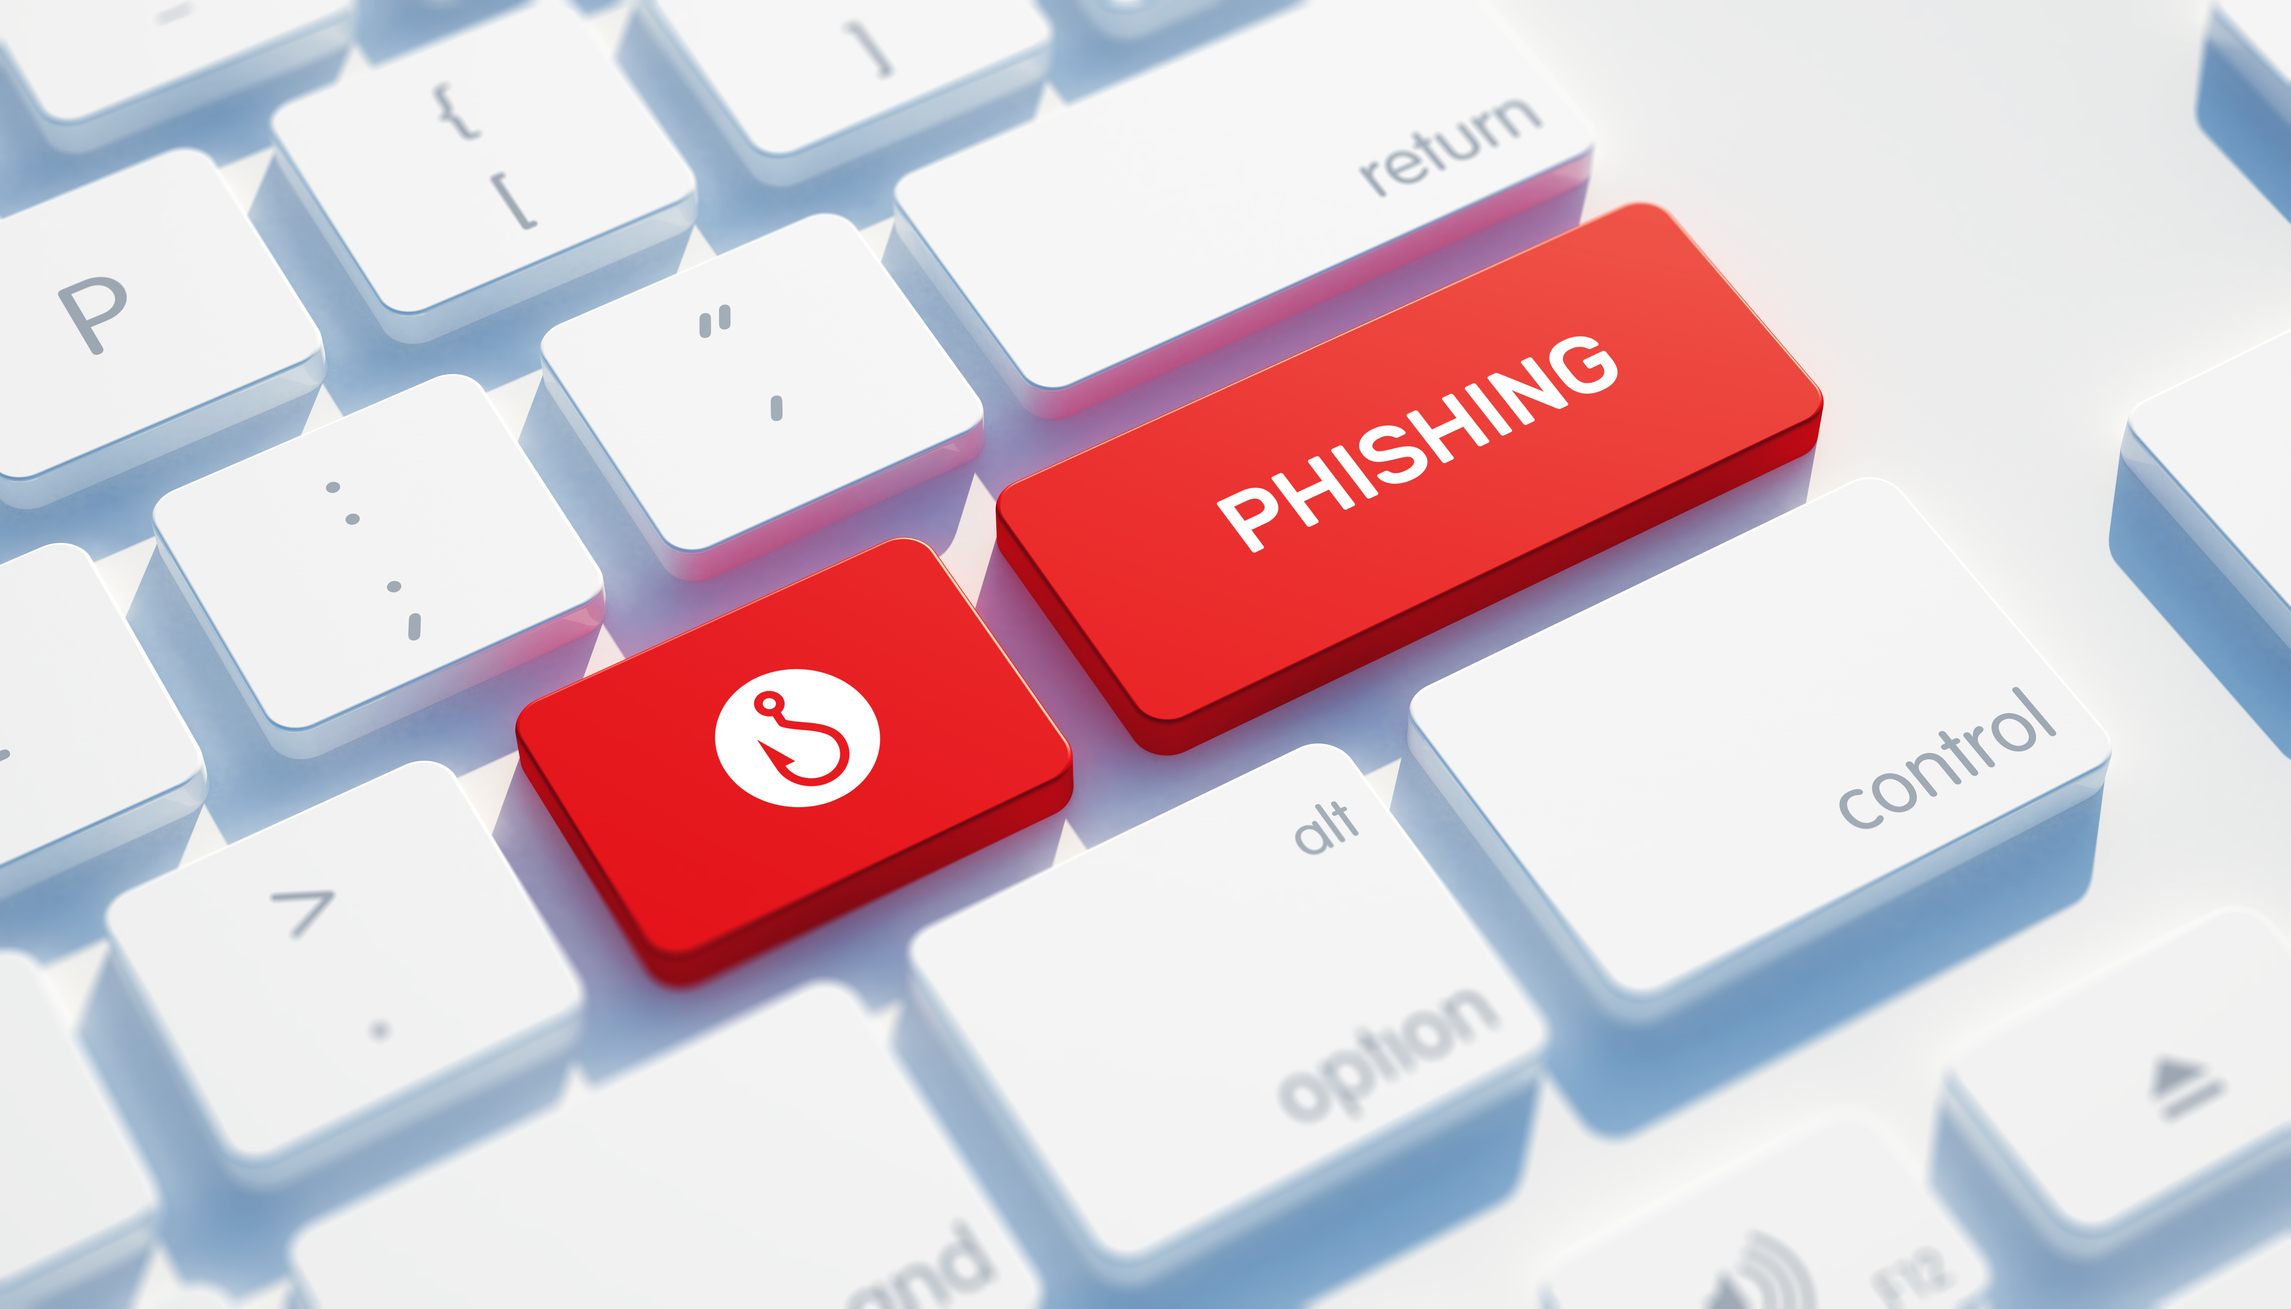 Security Update: Office 365 Phishing Attempts